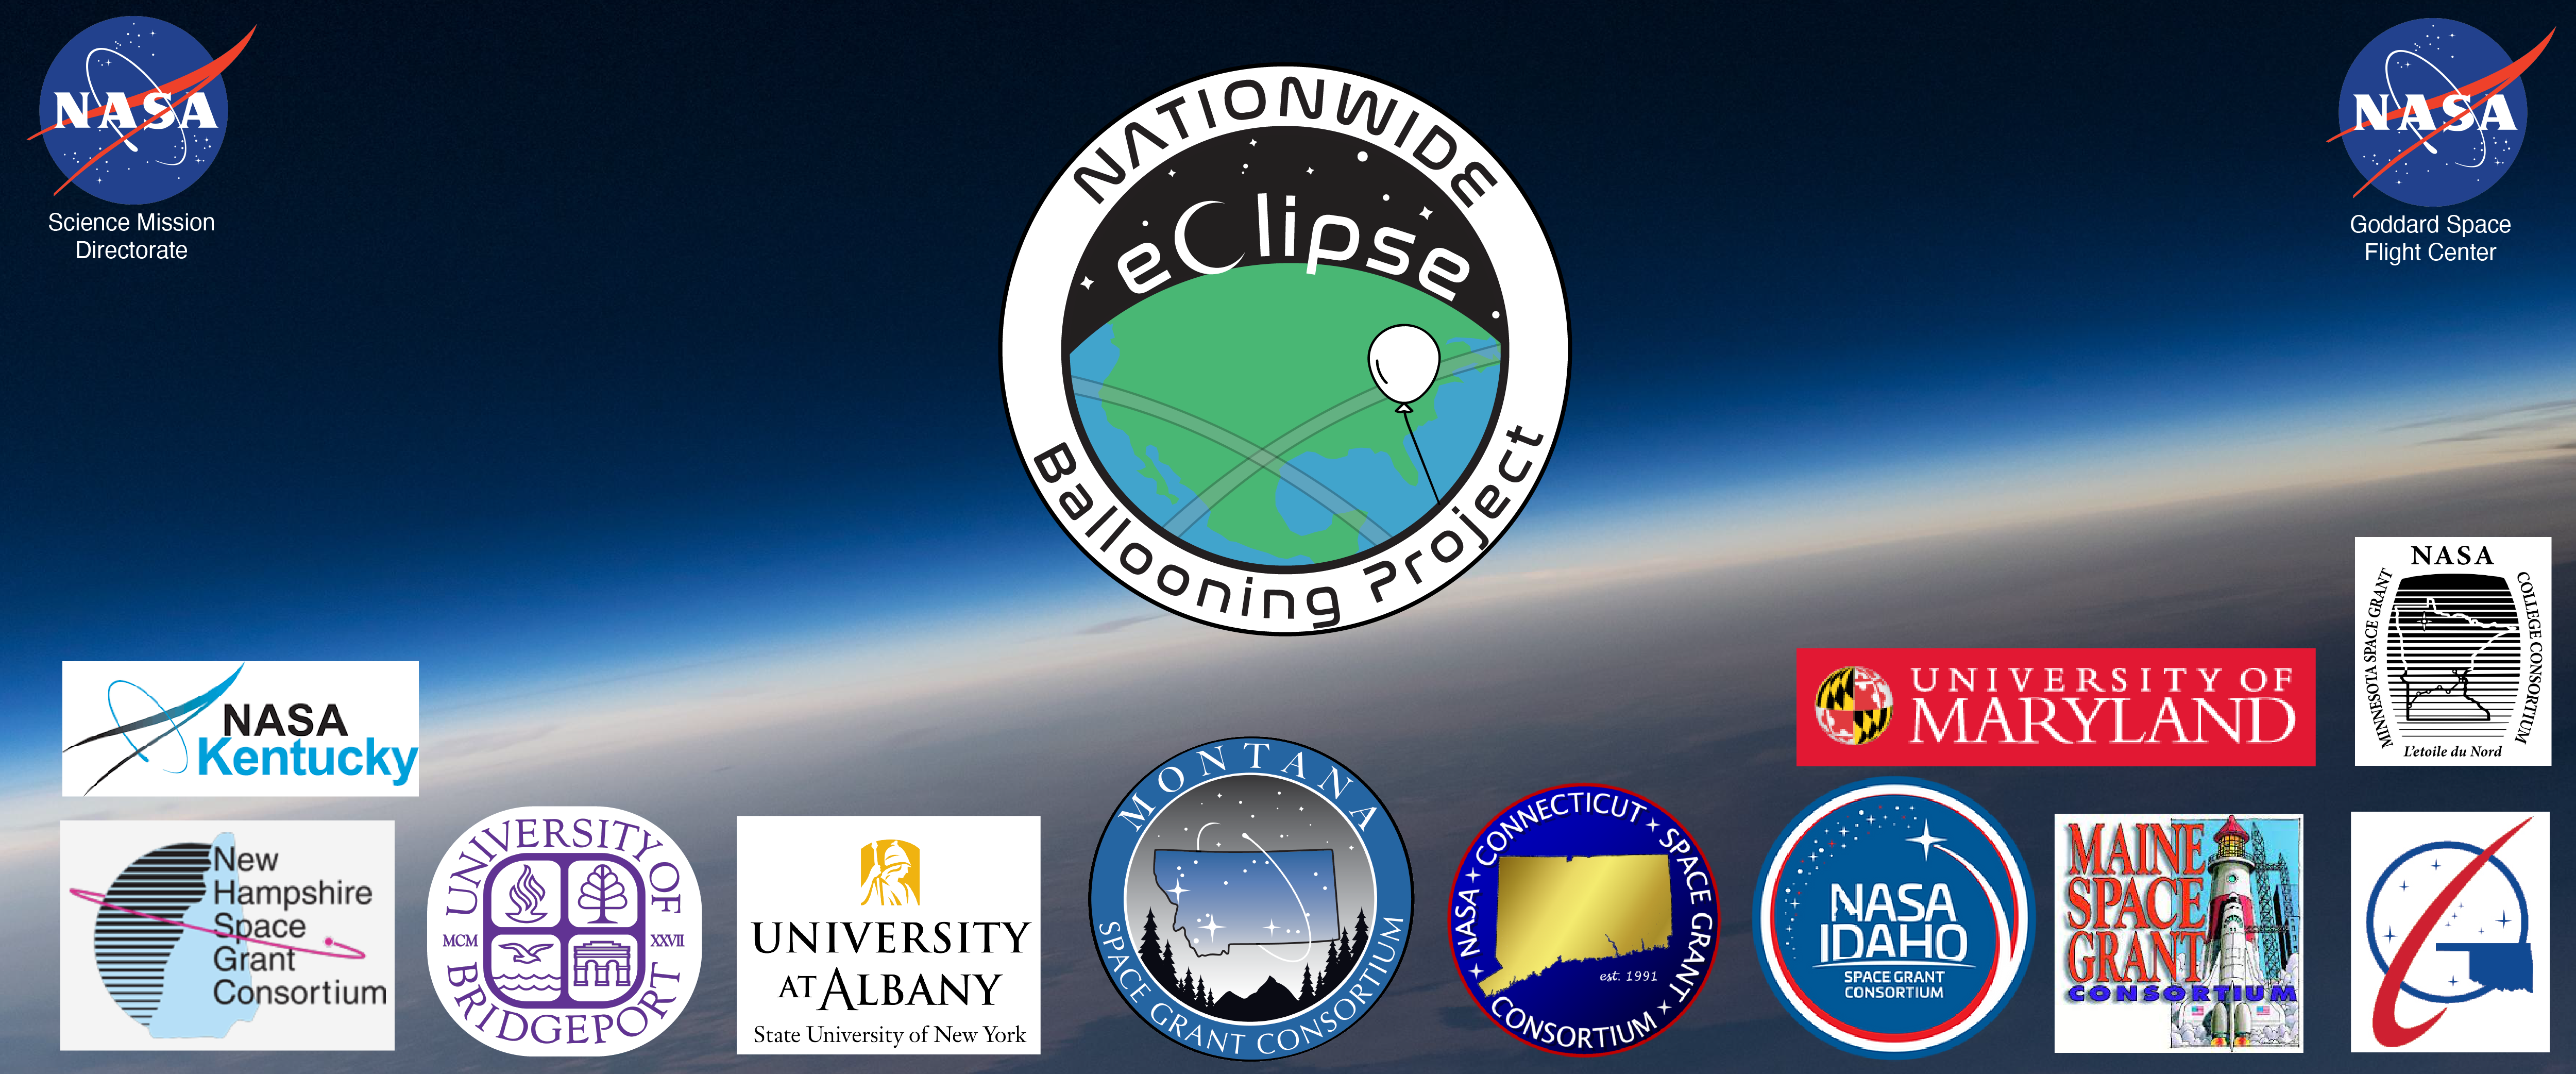 image showing logos of all participating institutions over a view of earth from the edge of space